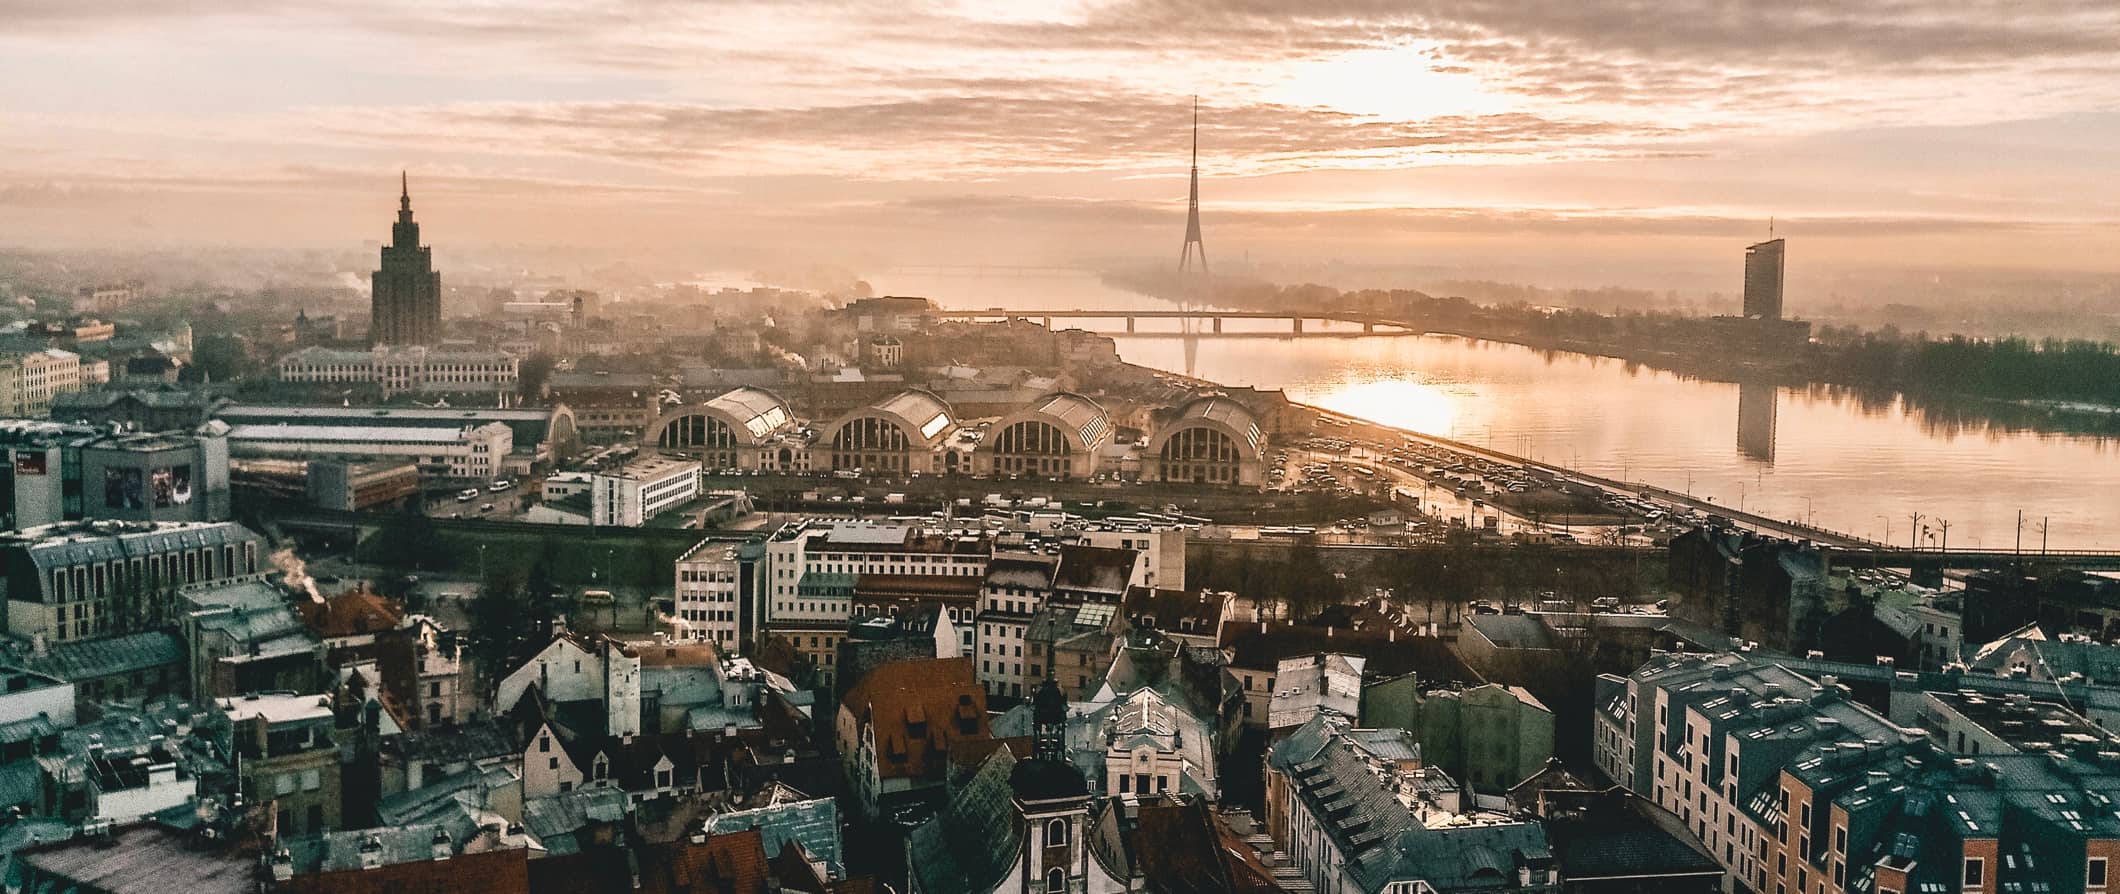 An aerial view of Riga, the capital of Latvia